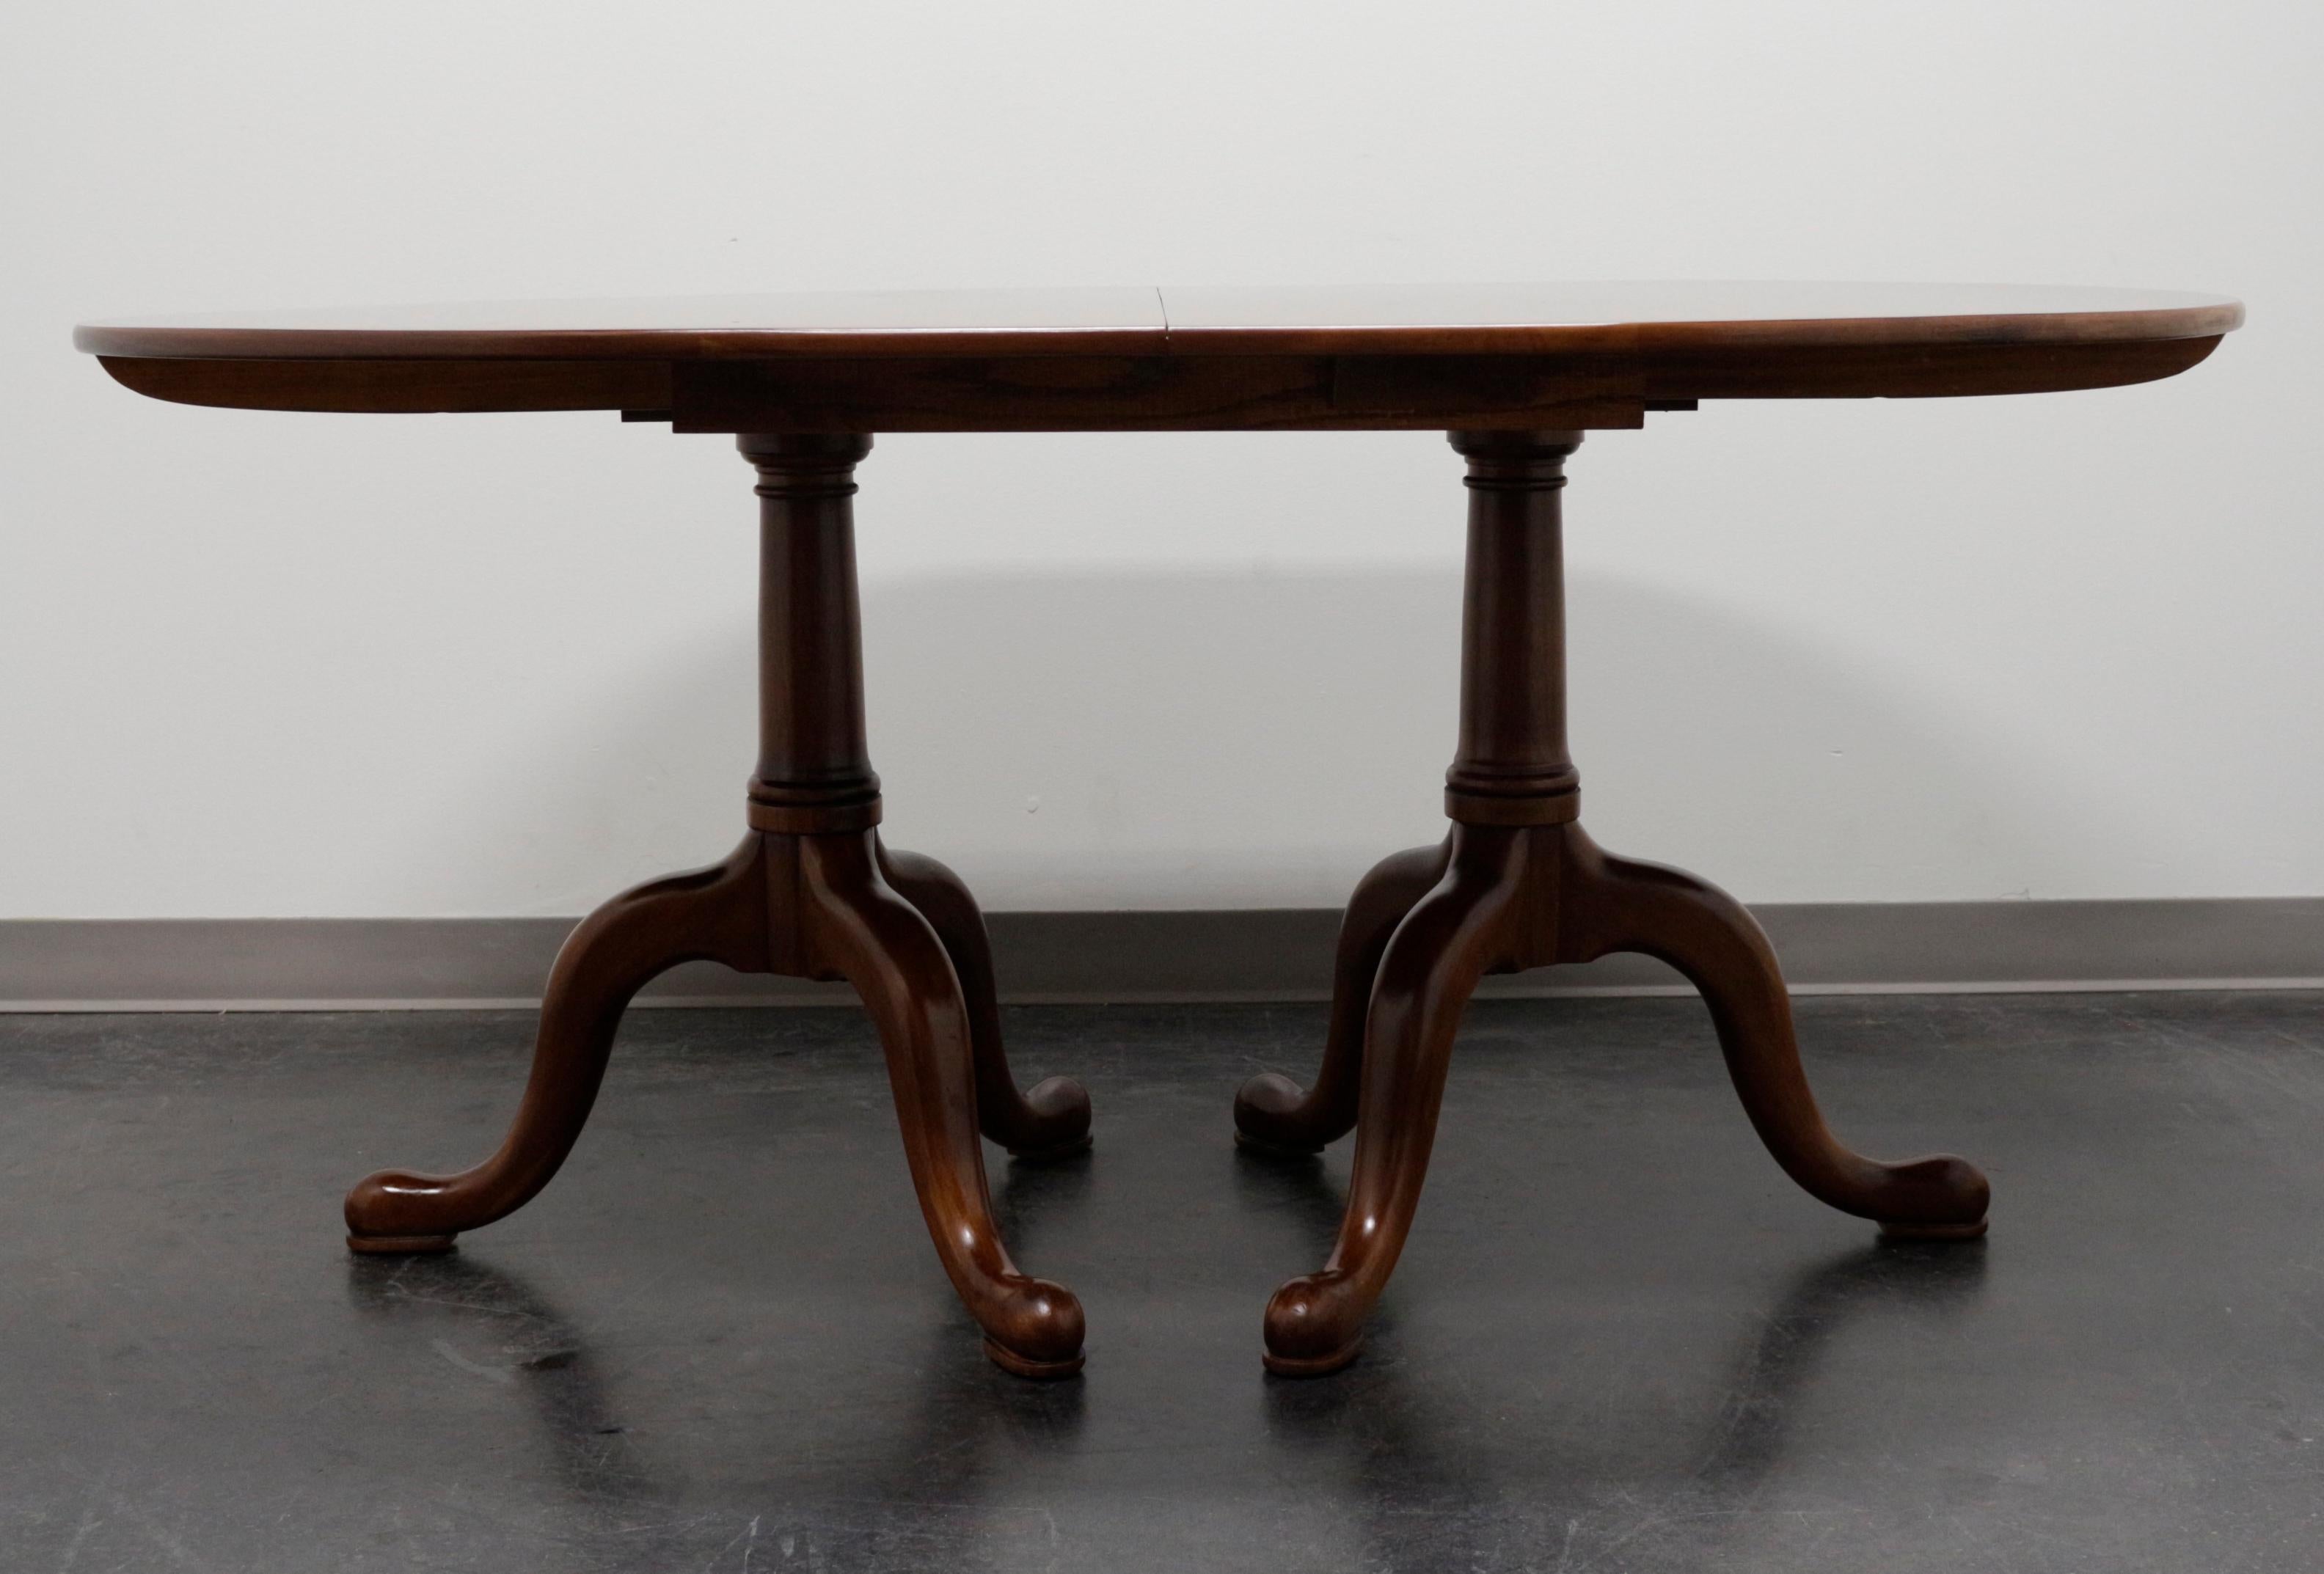 A Queen Anne style dining table by Henkel Harris of Winchester, Virginia, USA. Solid wild black cherry wood with an oval top that sits on two pedestals, each with three curved legs and pad feet. Wood expansion sliders. Includes four extension